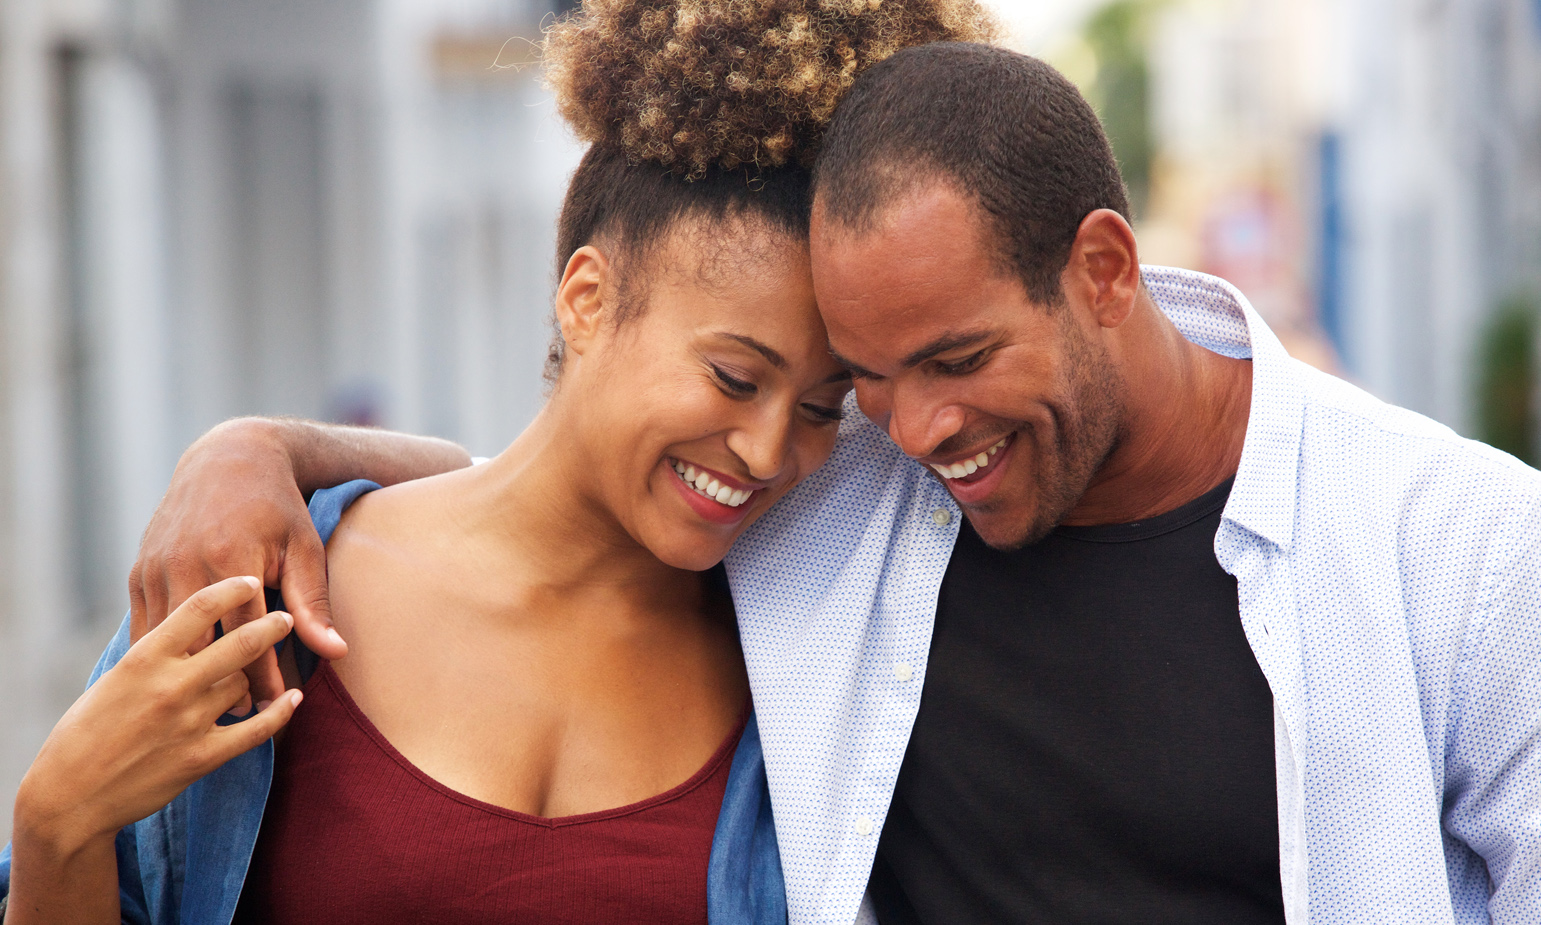 9 Dating Sites for Single Parents – Find Love Again